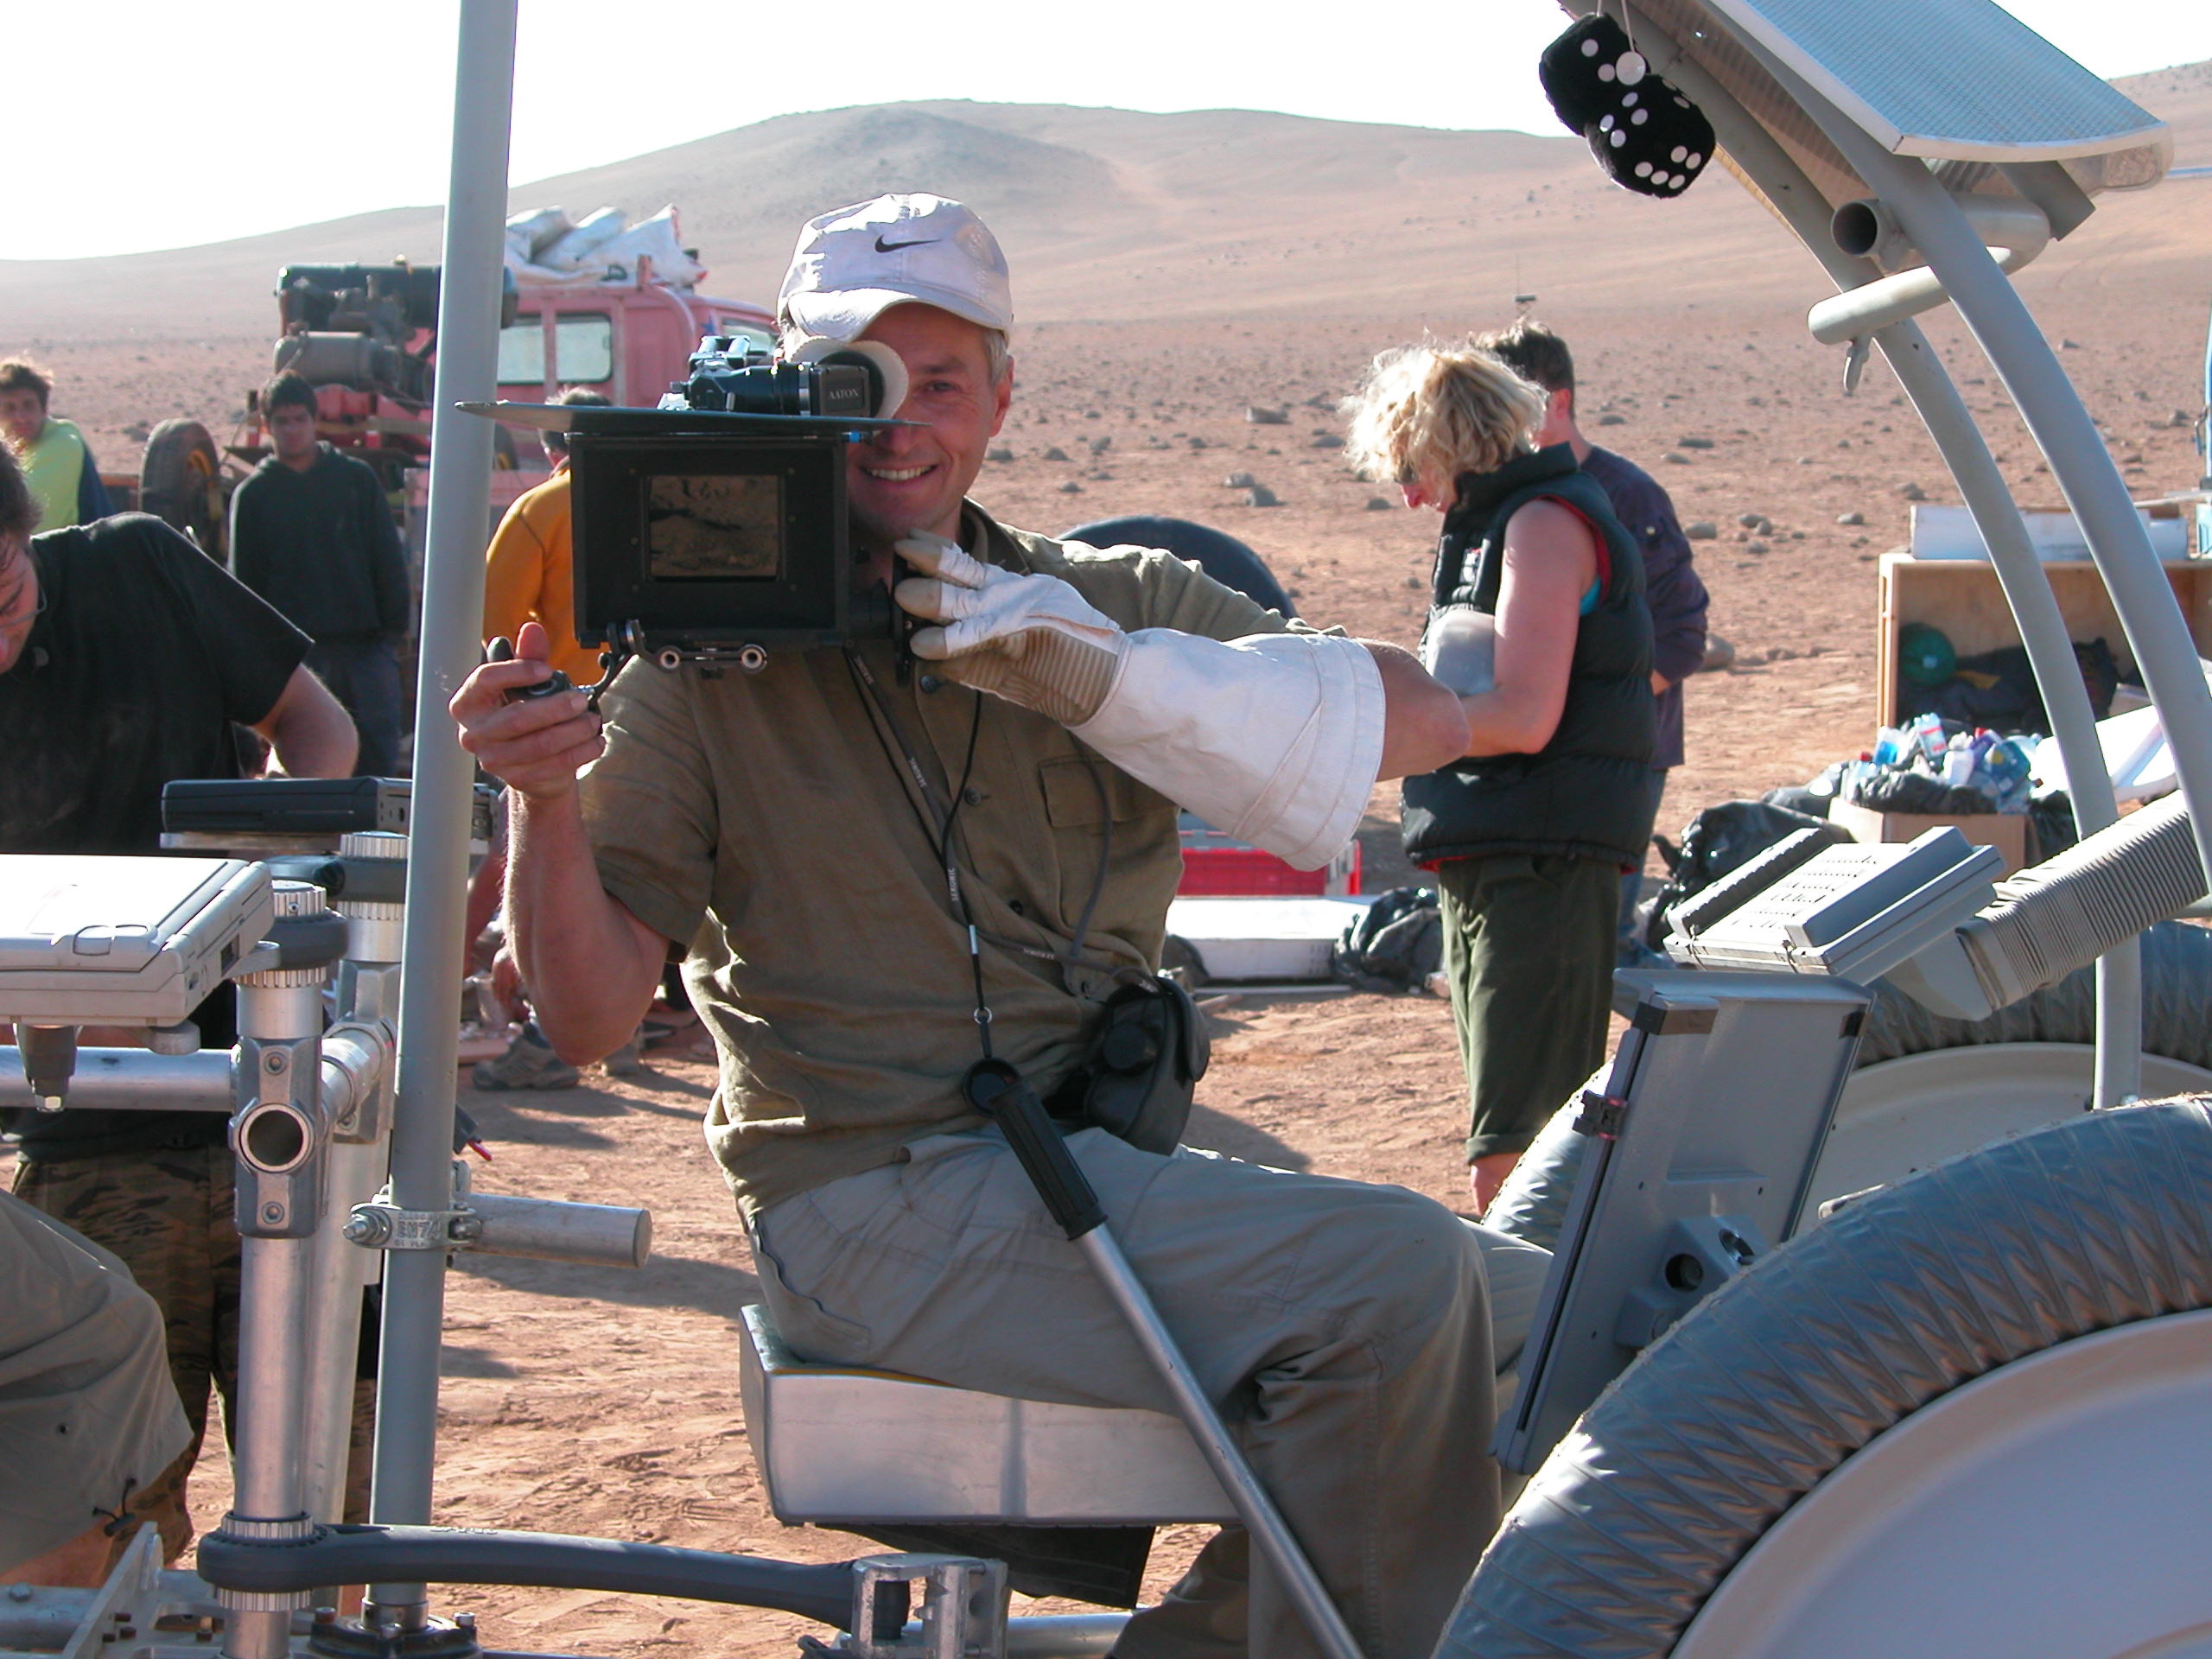 Shooting in the Atacama Desert in Chile on Space Odyssey - Voyage To The Planets